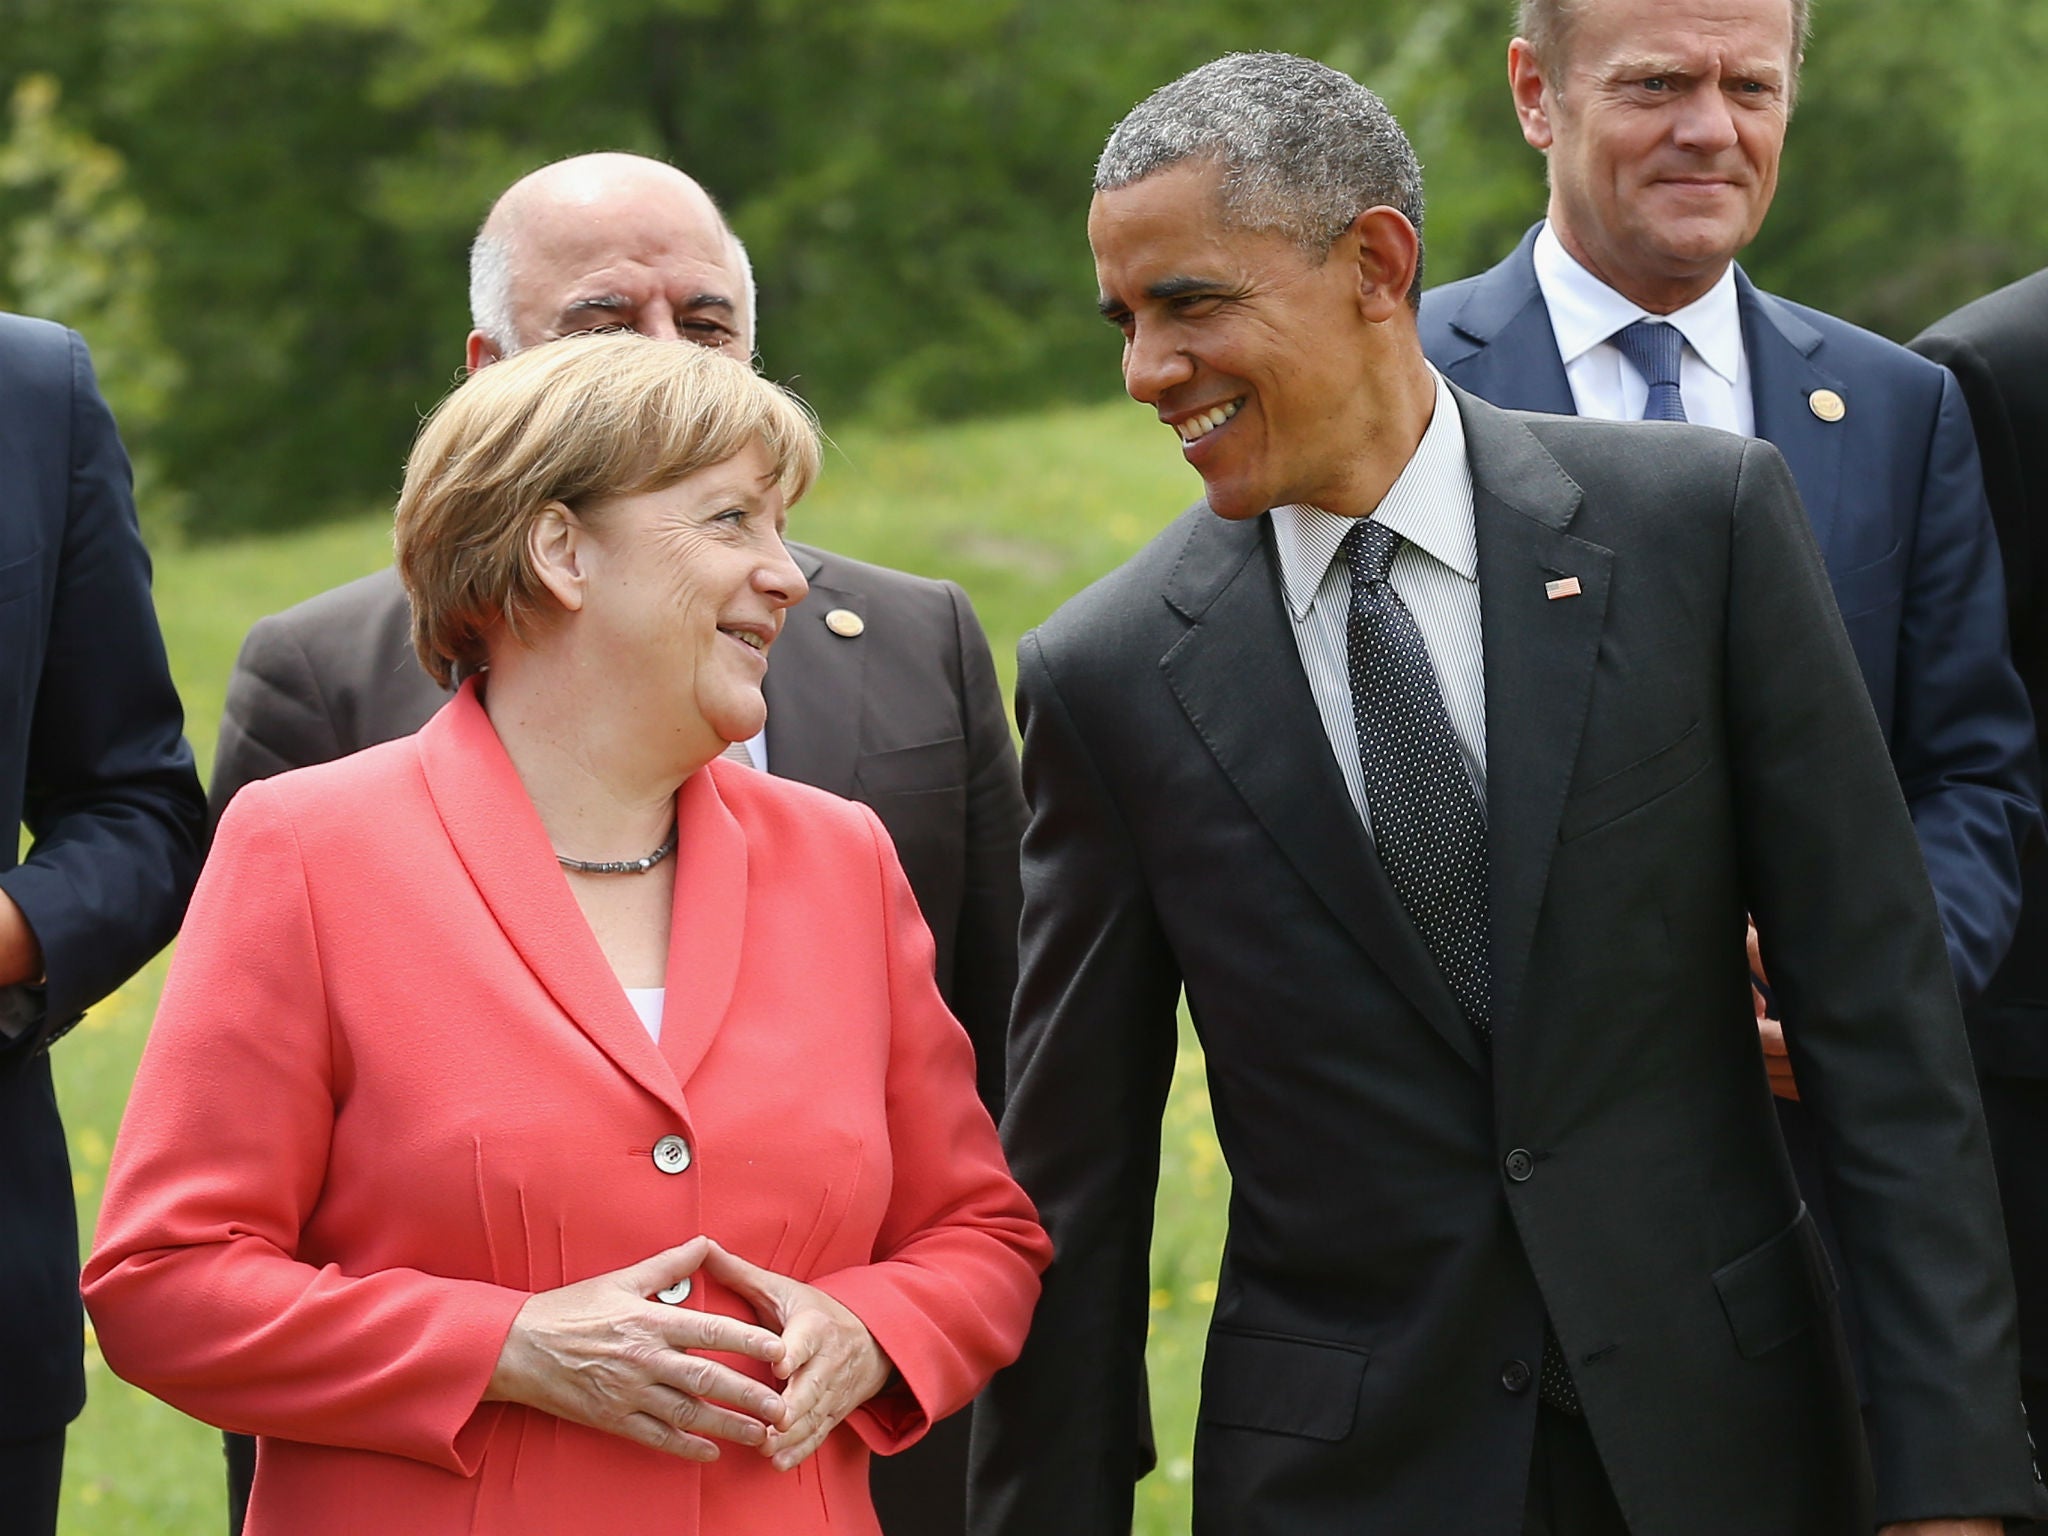 Obama and Merkel will meet today (24 April) to discuss the U.S-E.U trade deal among other issues